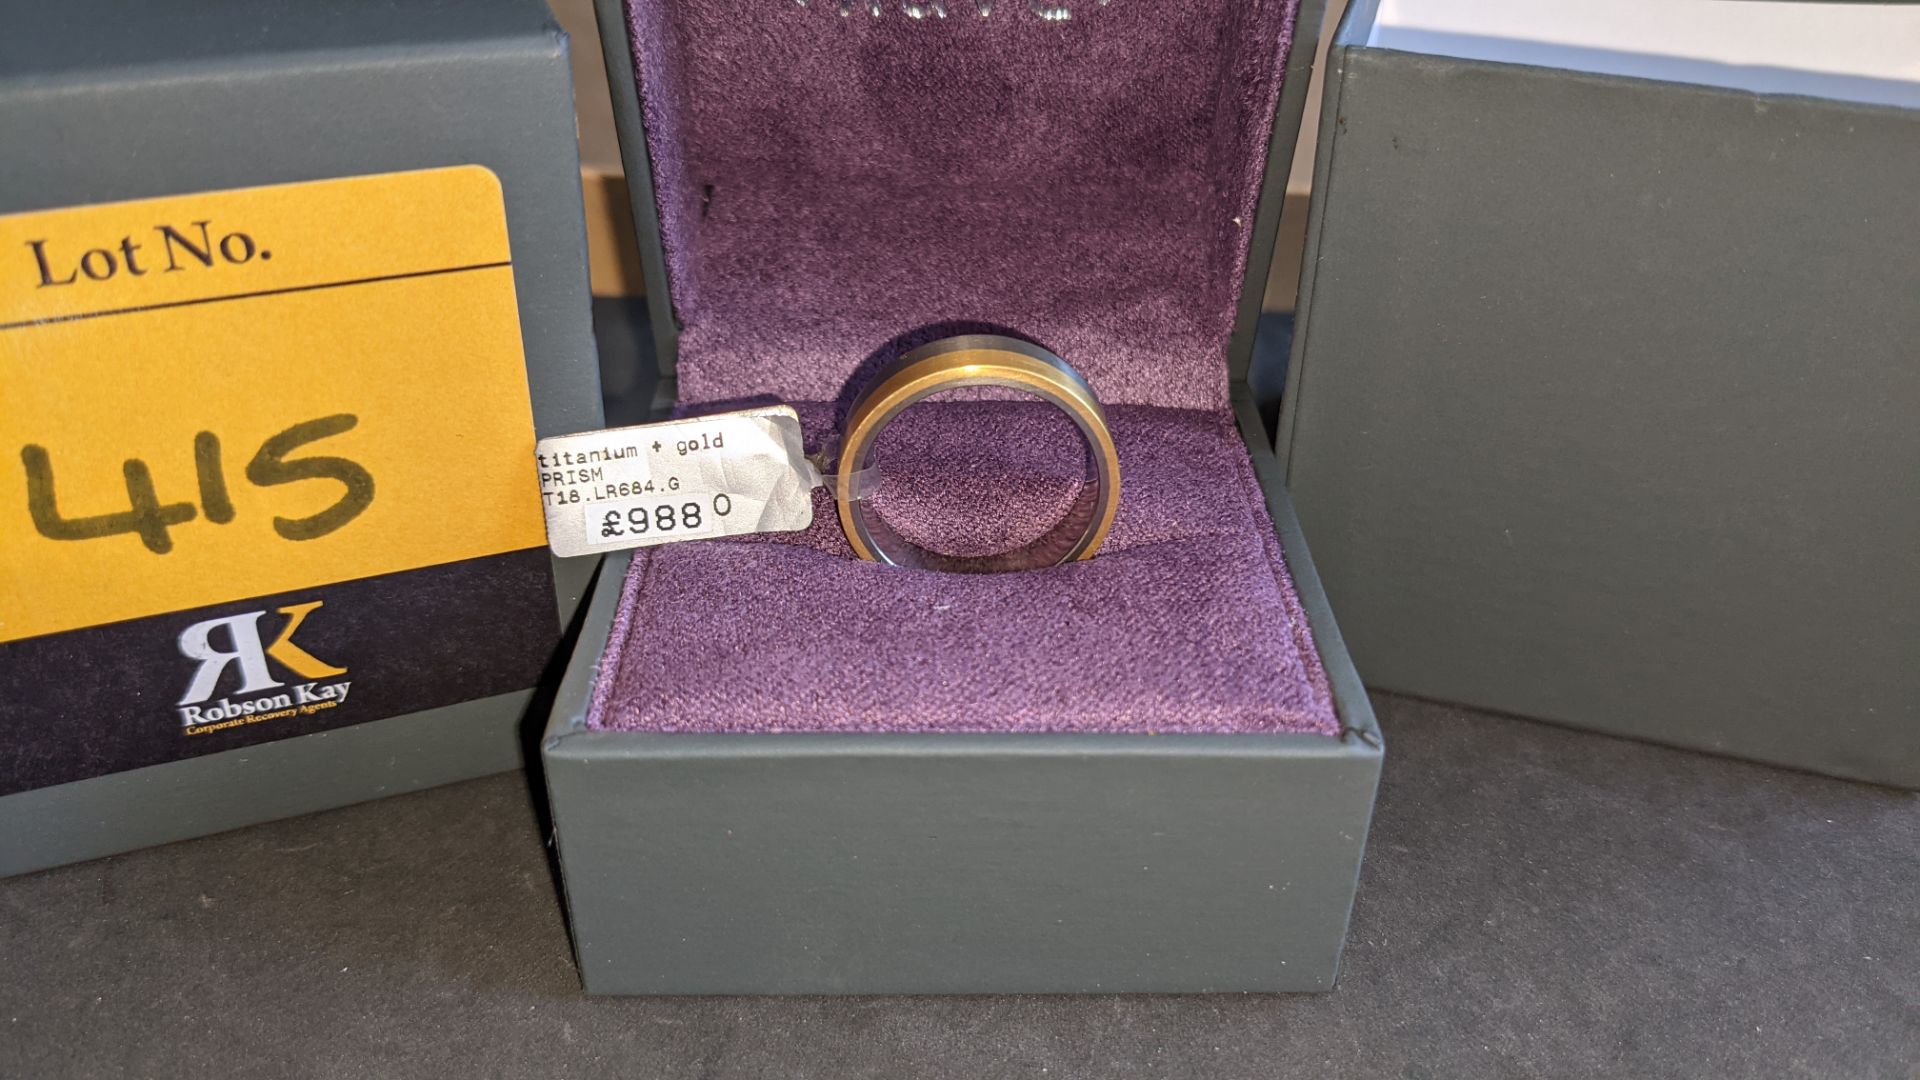 Titanium & 18ct yellow gold 6mm ring RRP £988 - Image 2 of 15